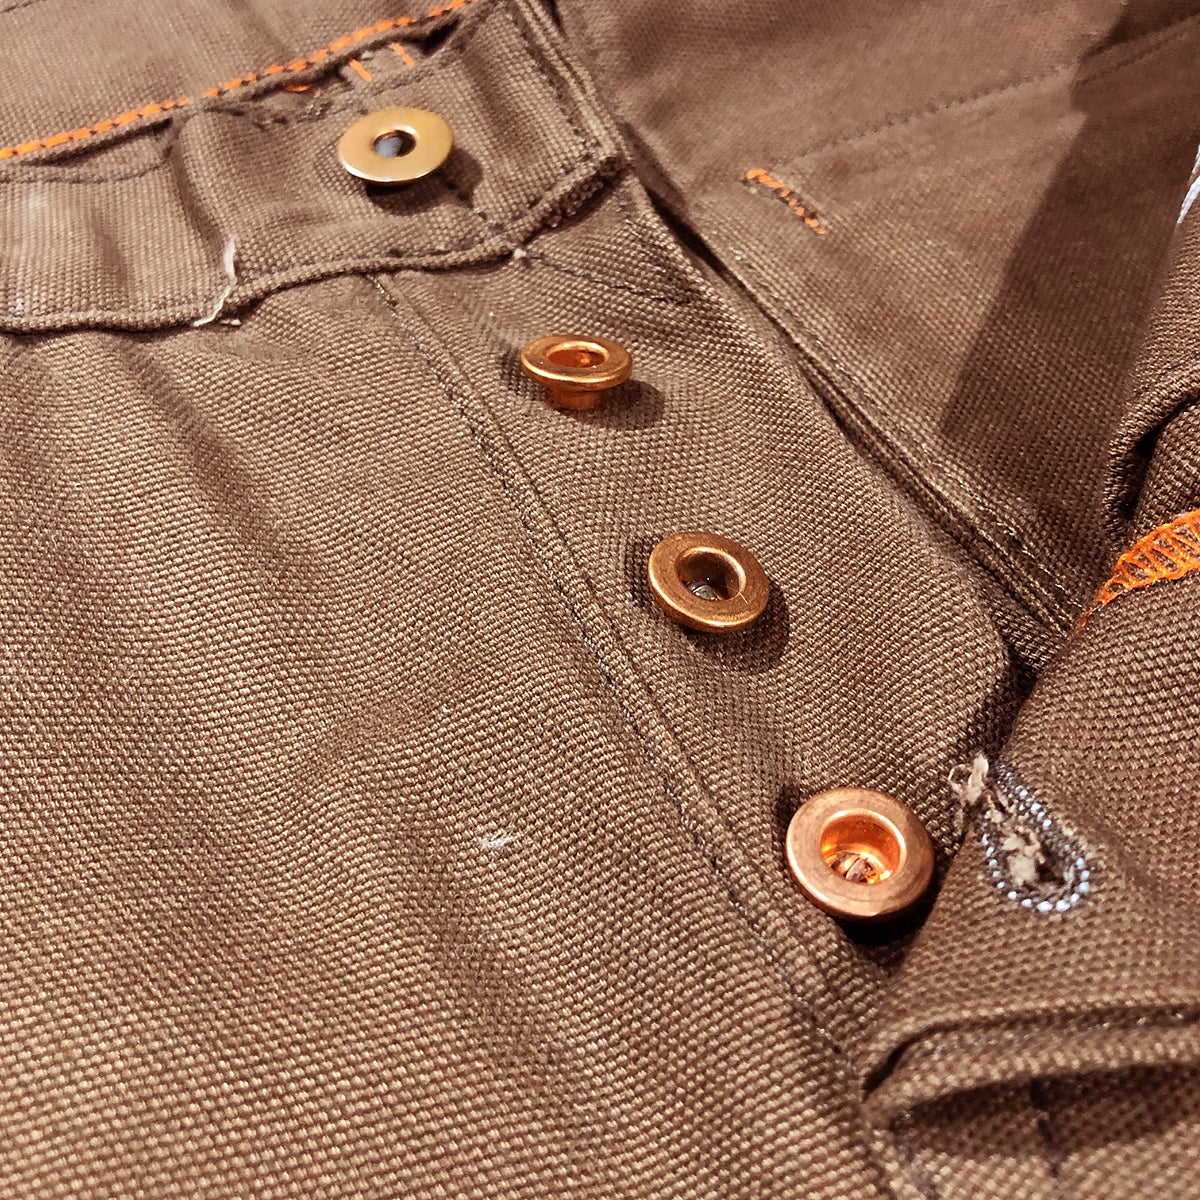 12oz Duck Canvas Timber CHINO Version